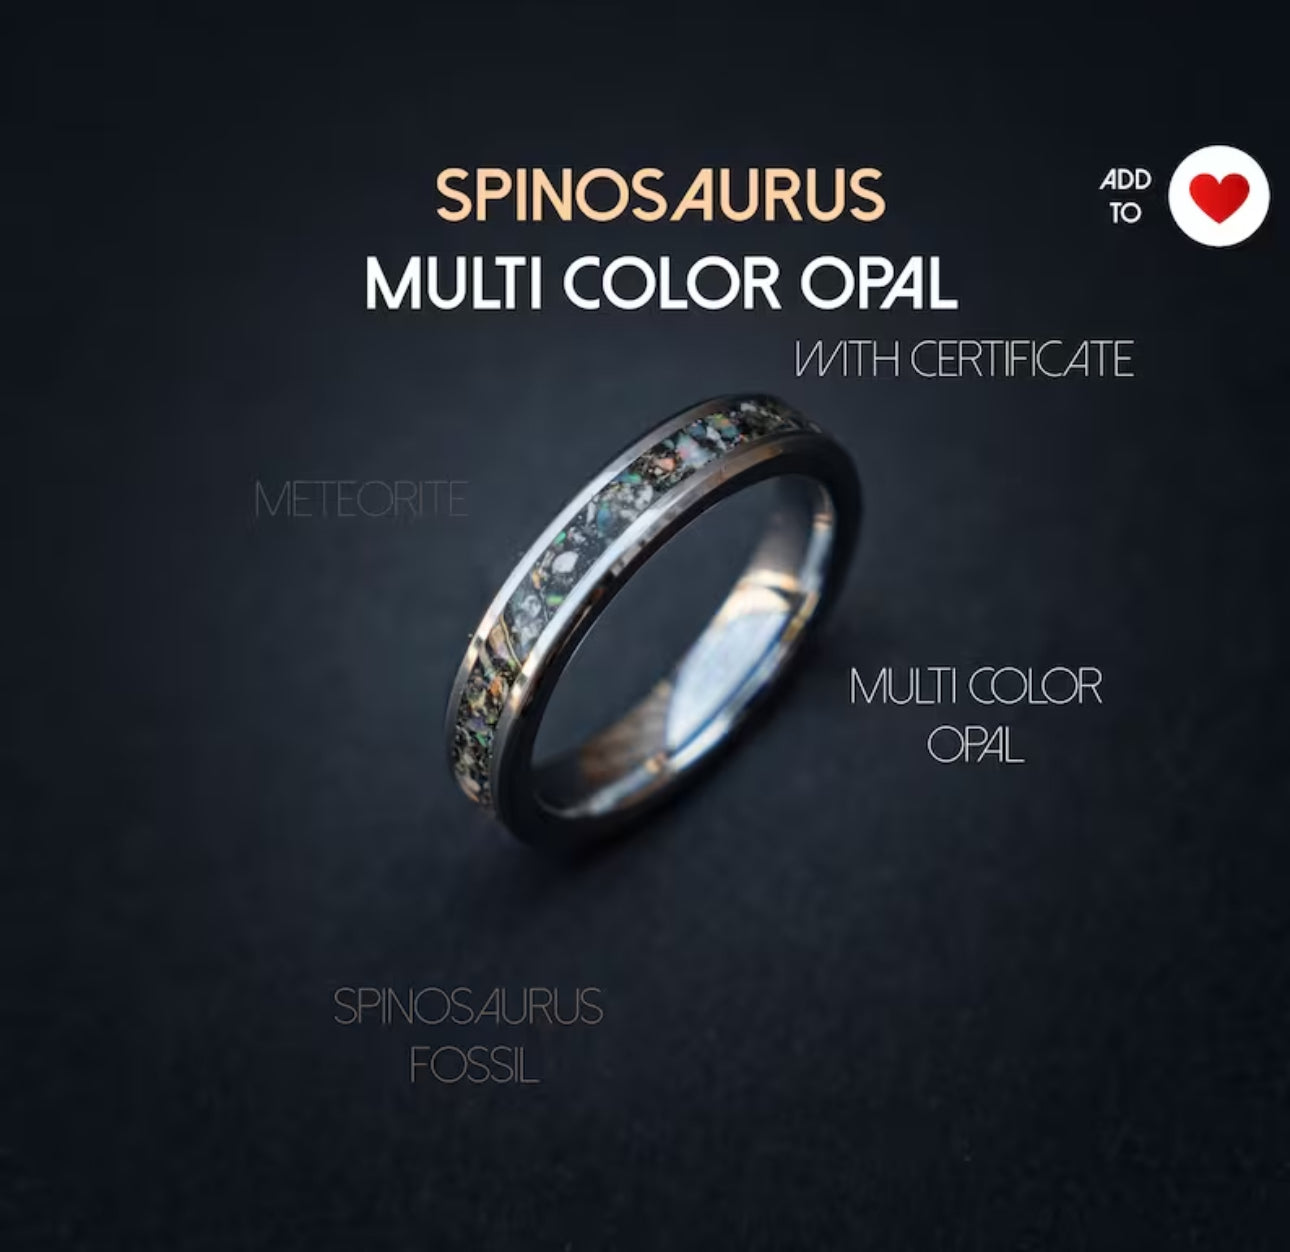 Beveled tungsten ring filled with Spinosaurus, meteorite and multi-color opal 4 mm for Maud - Decazi